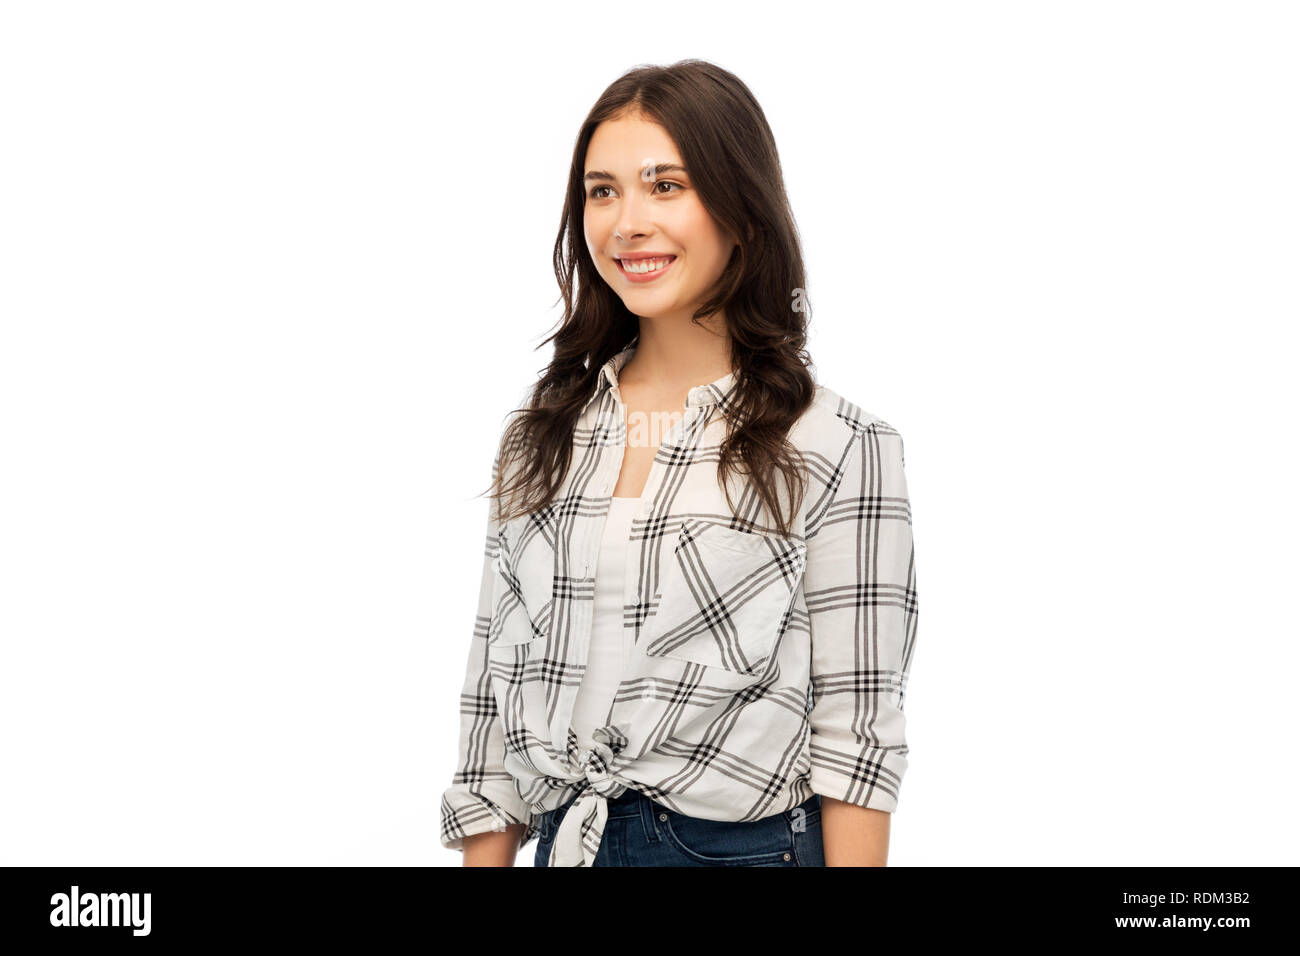 young woman or teenage girl in checkered shirt Stock Photo